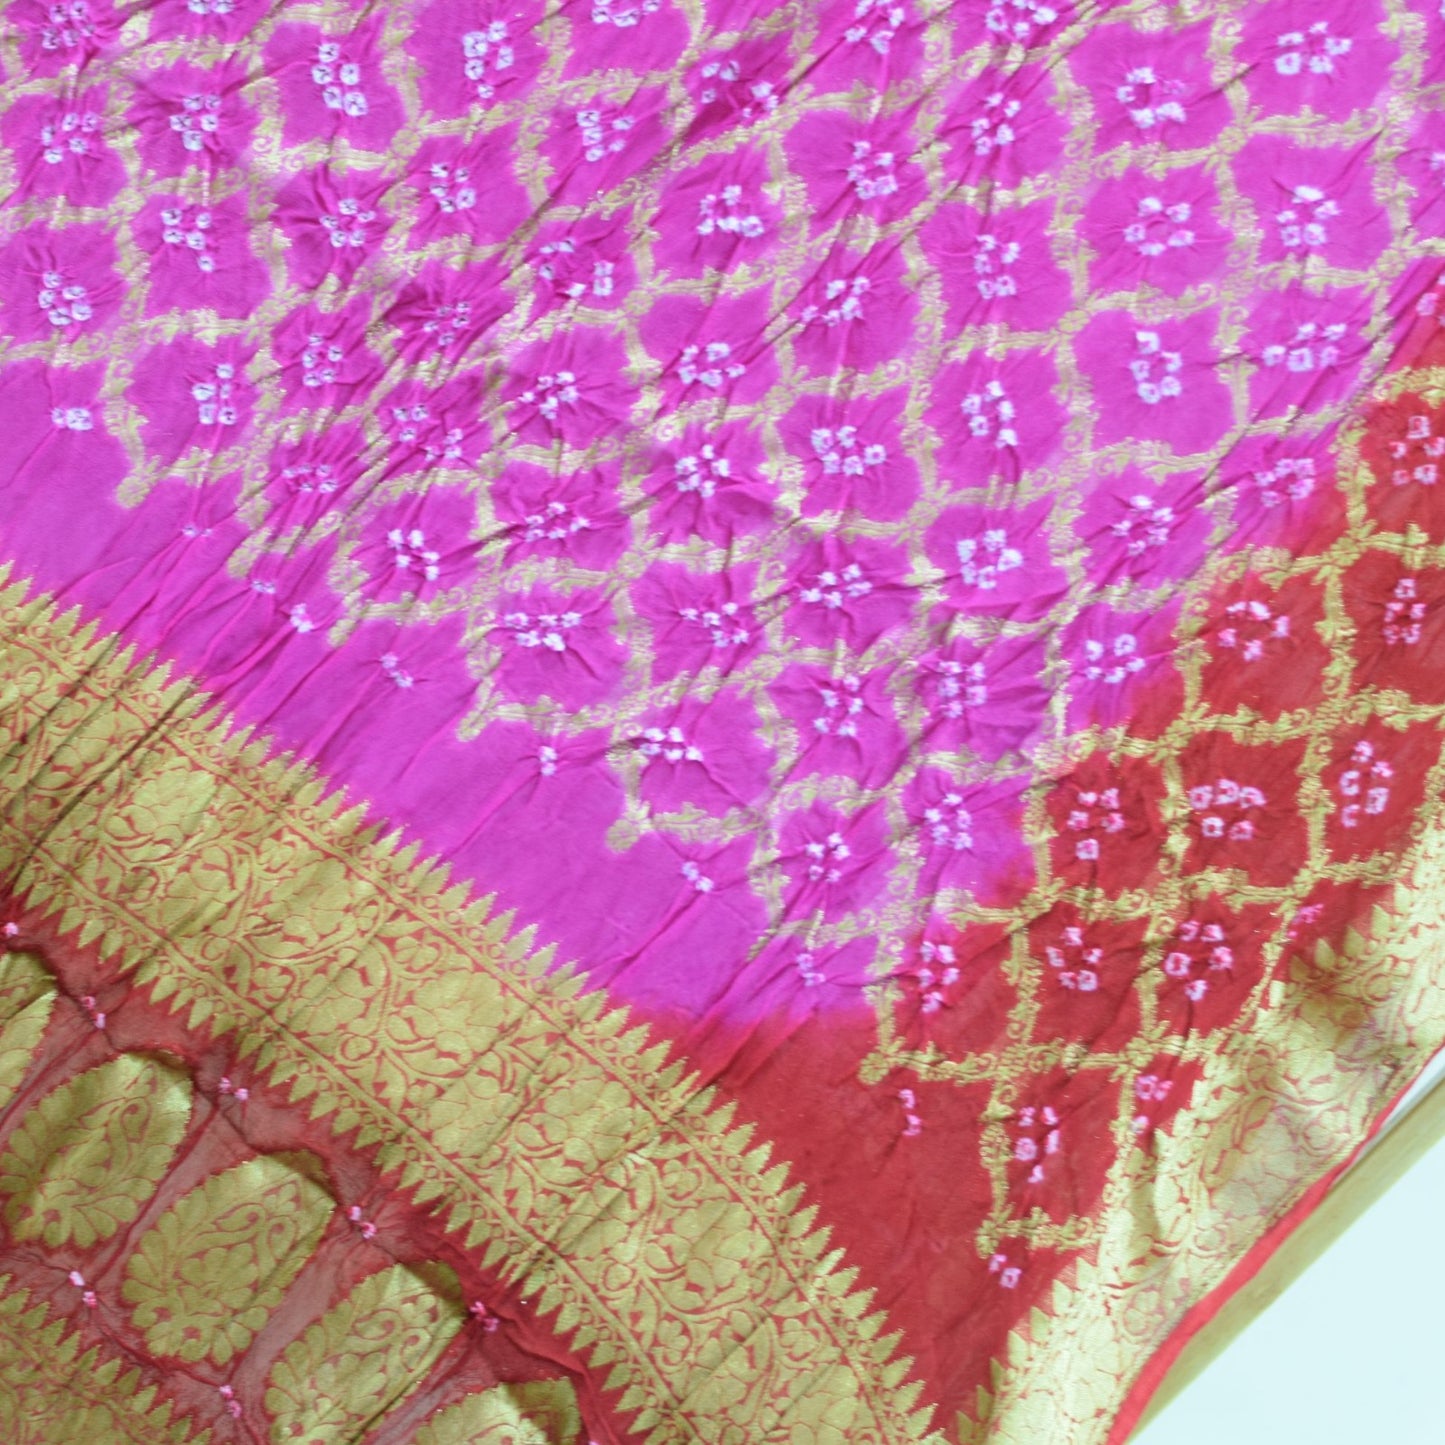 Pure Georgette Banarasi With Fine Bandhej Work Dupatta - Pink and Red